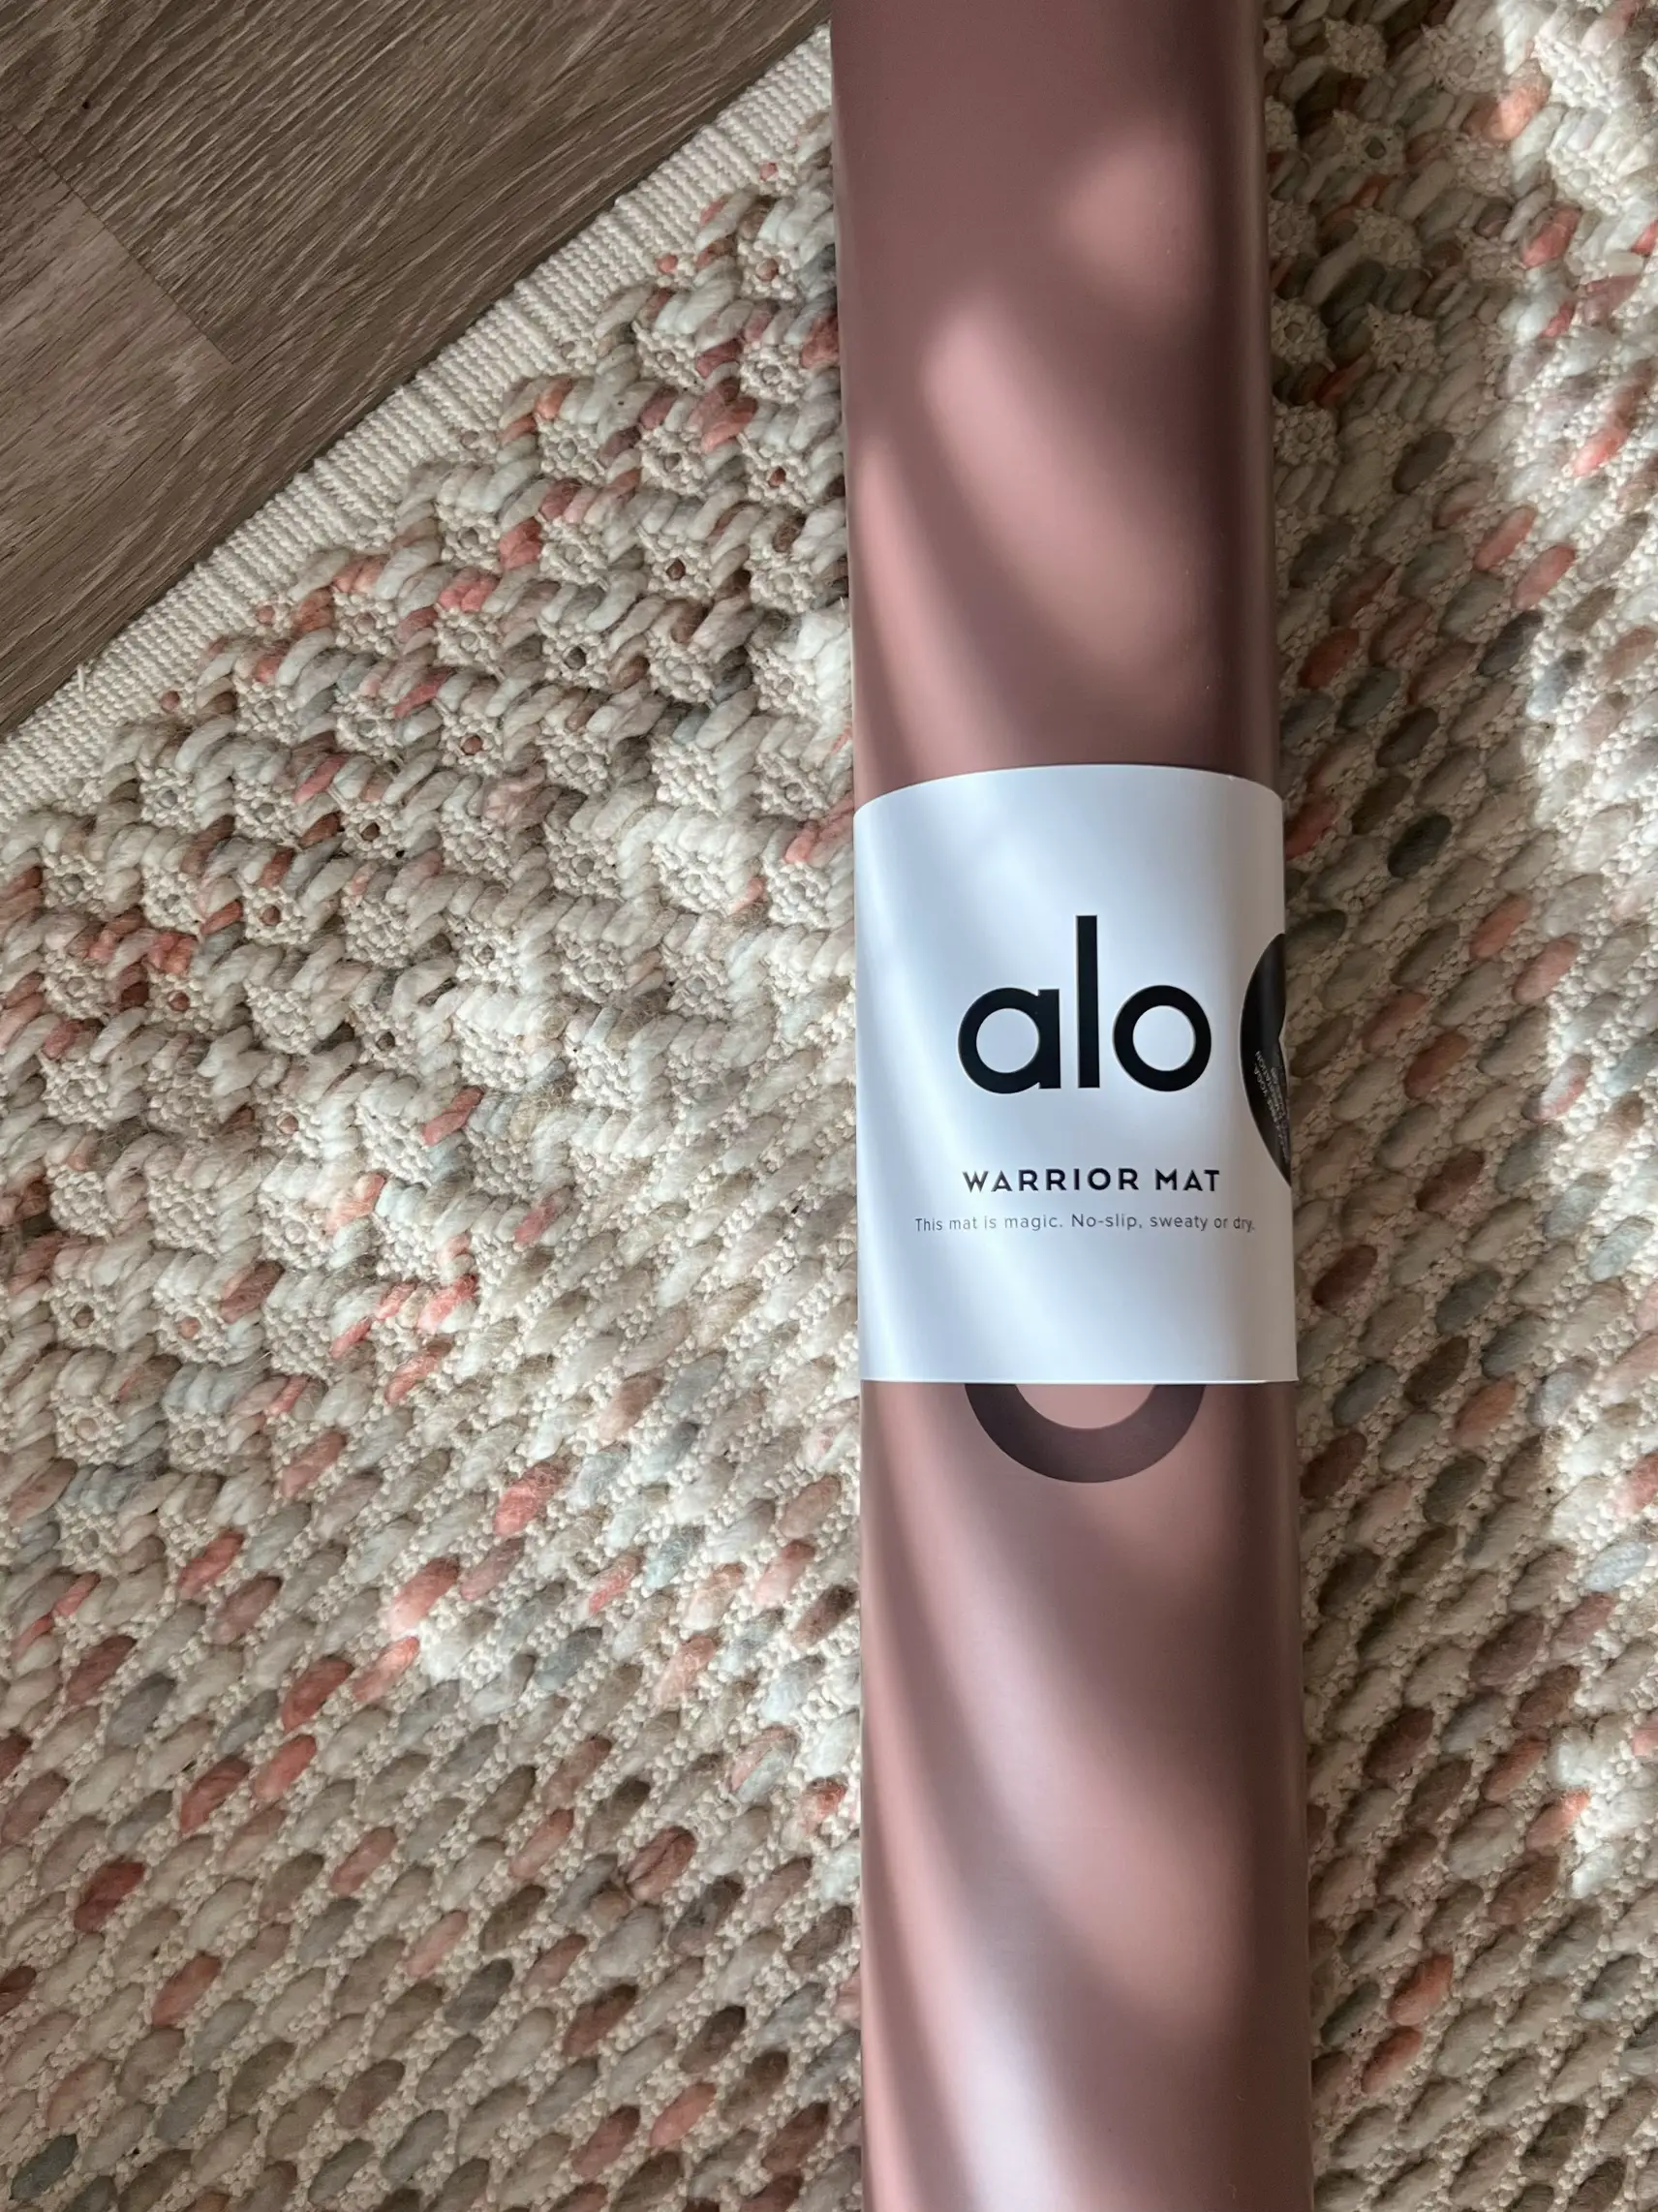 Alo Yoga - “When I started doing yoga, I thought all mats were the